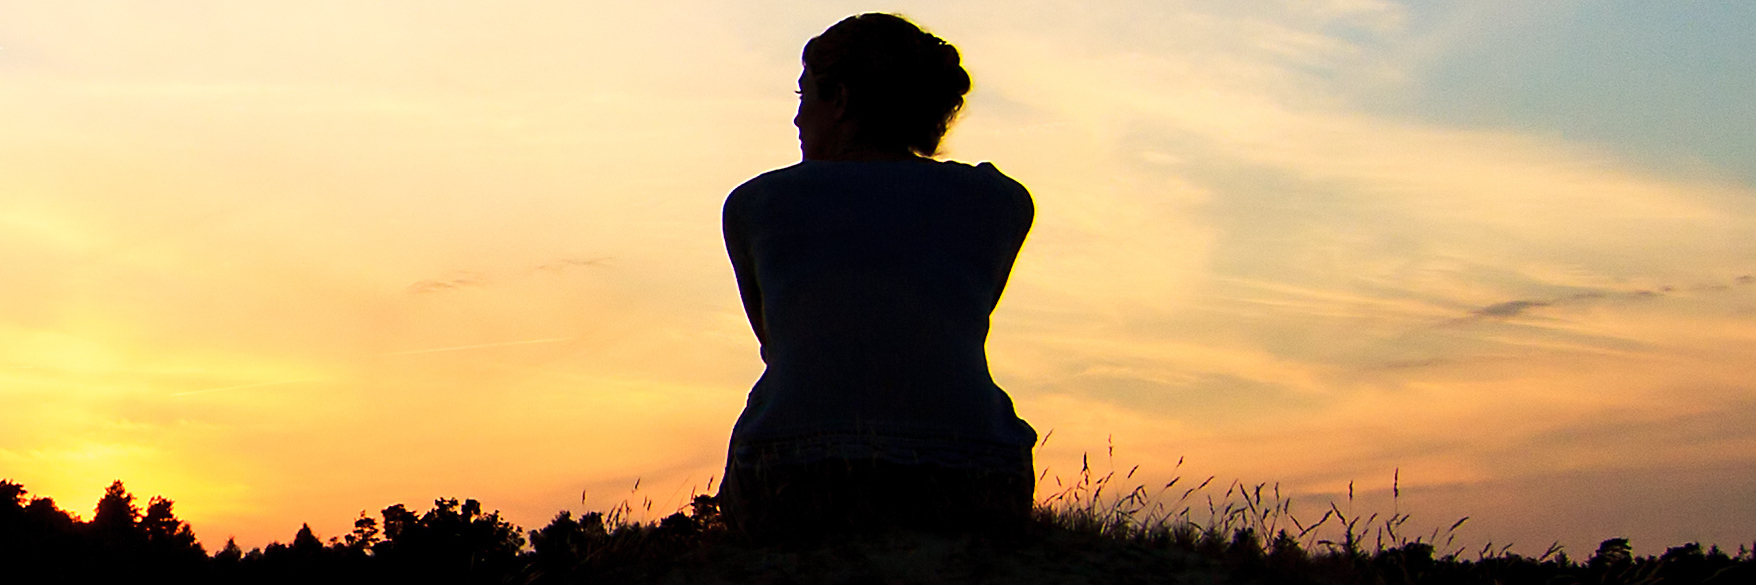 Silhouette of woman sitting on grass at sunset